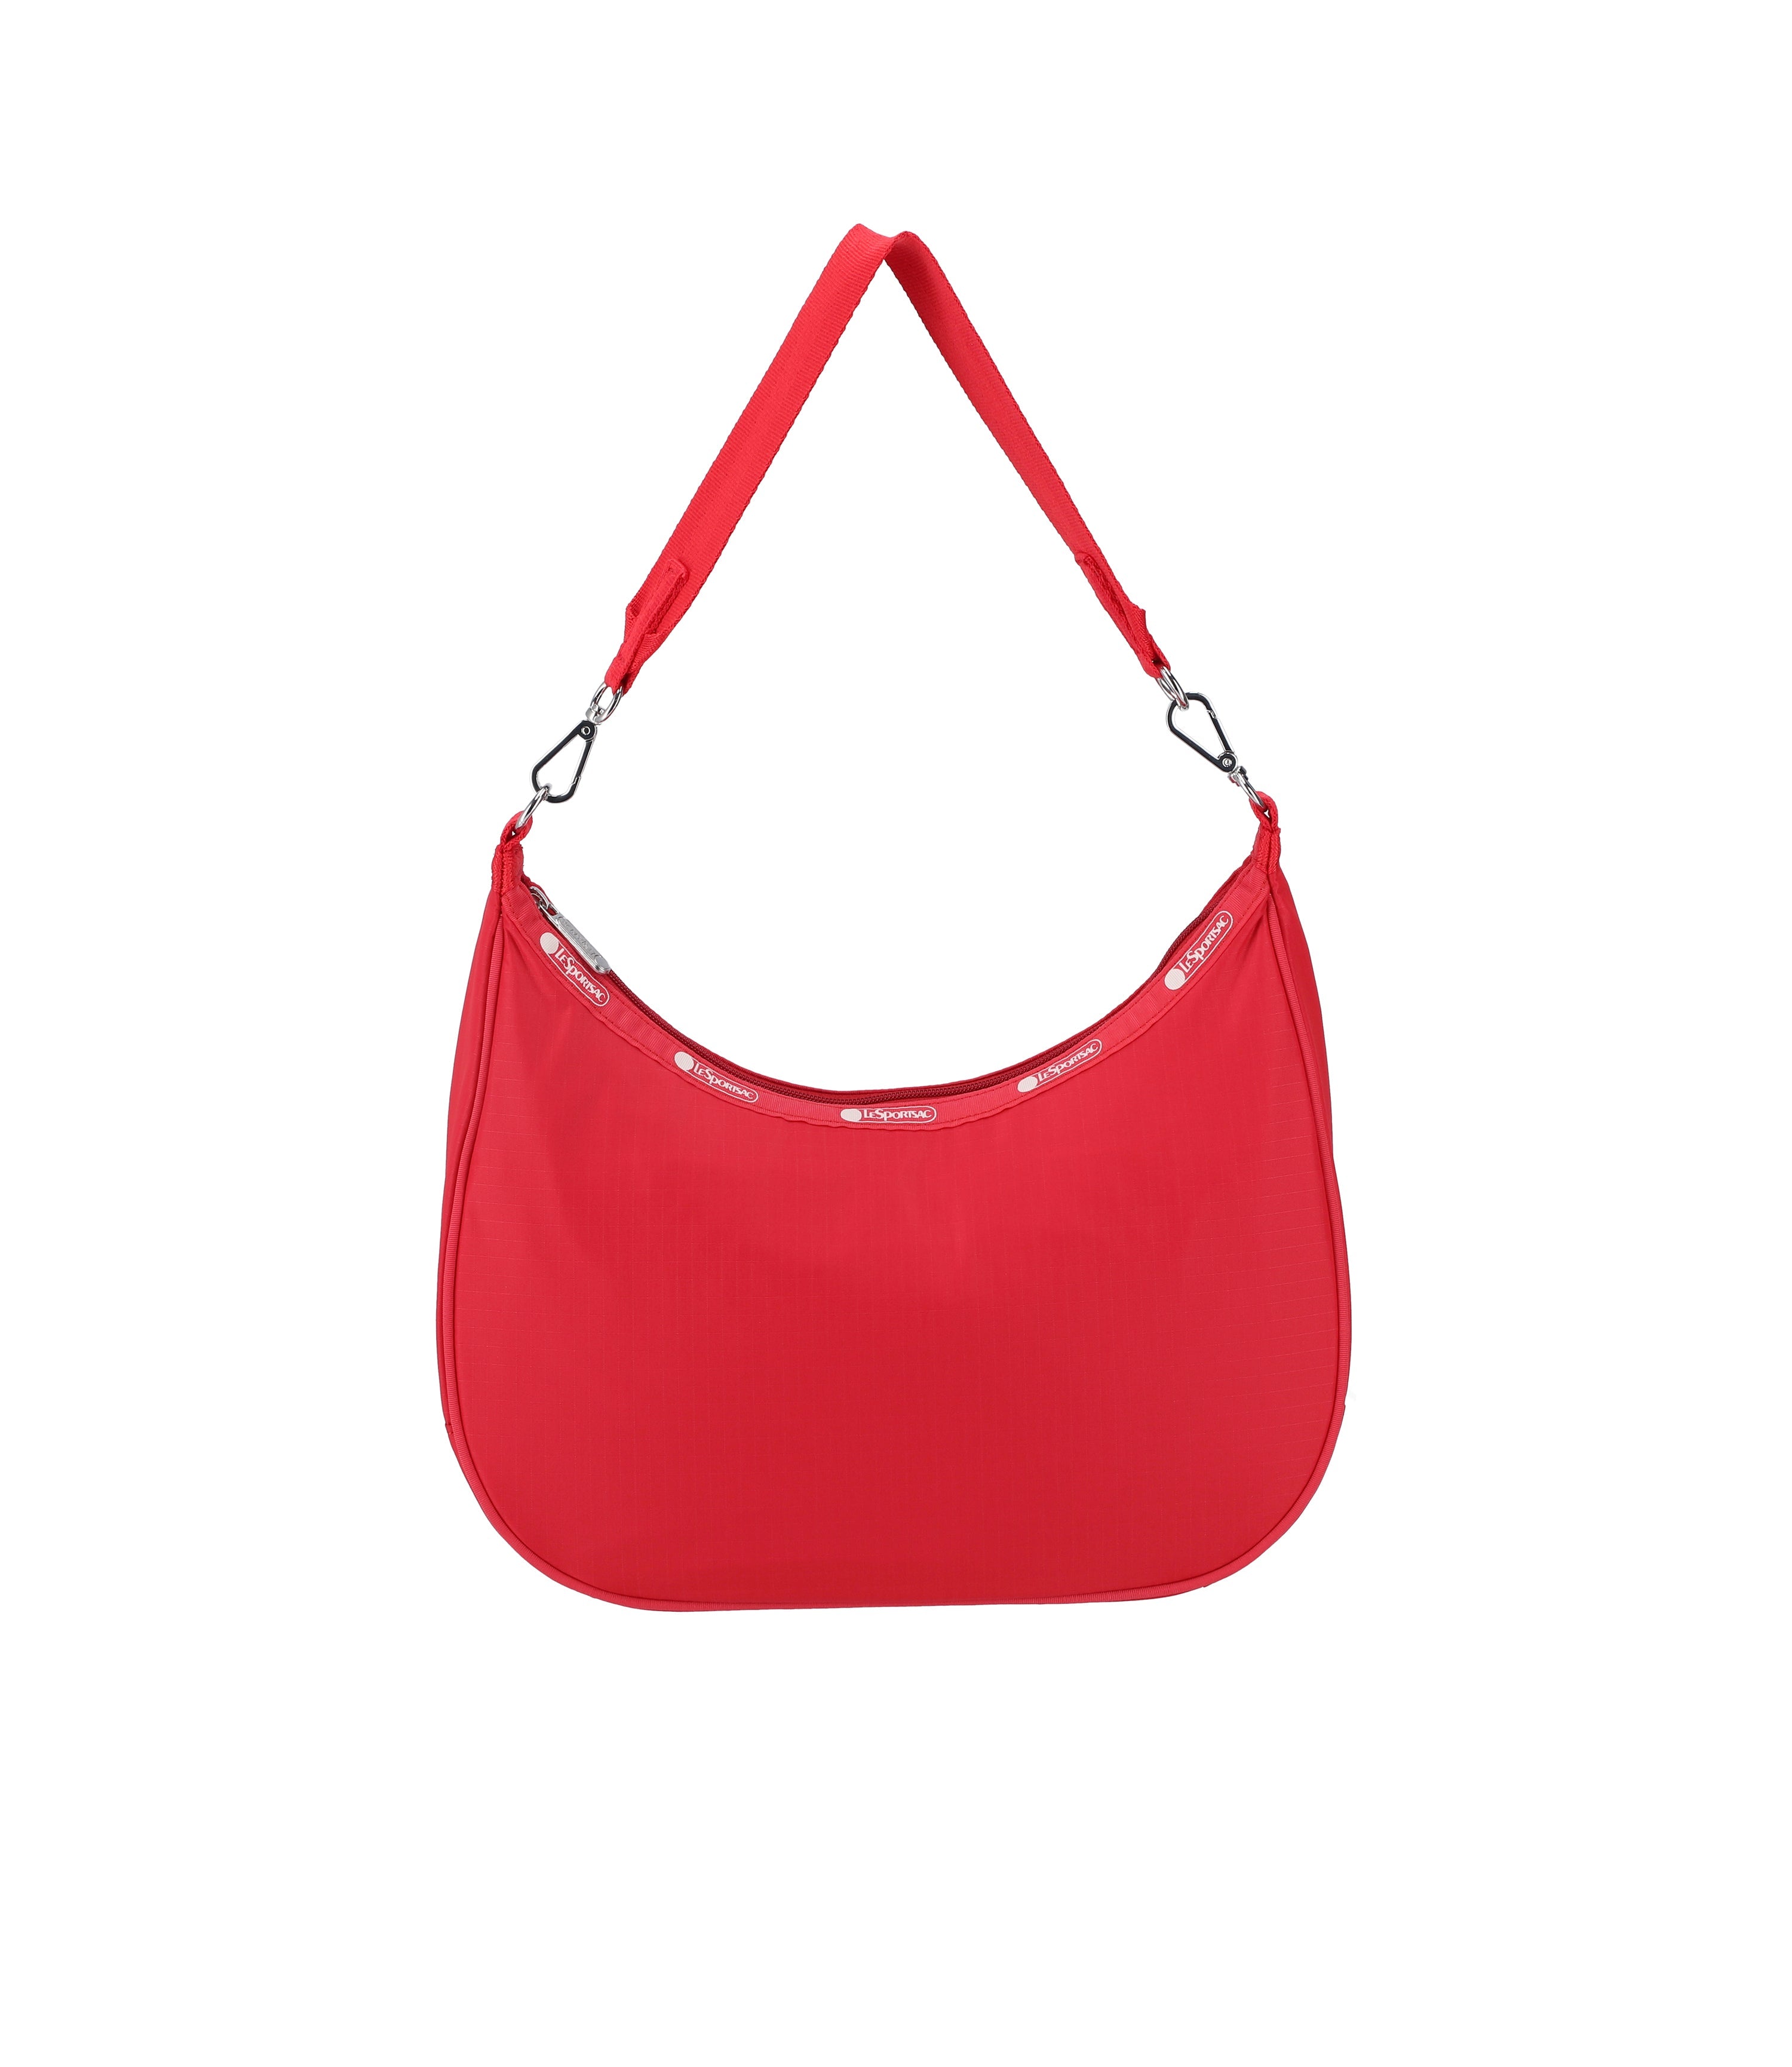 North/South Convertible Hobo - Popsicle Red solid – LeSportsac